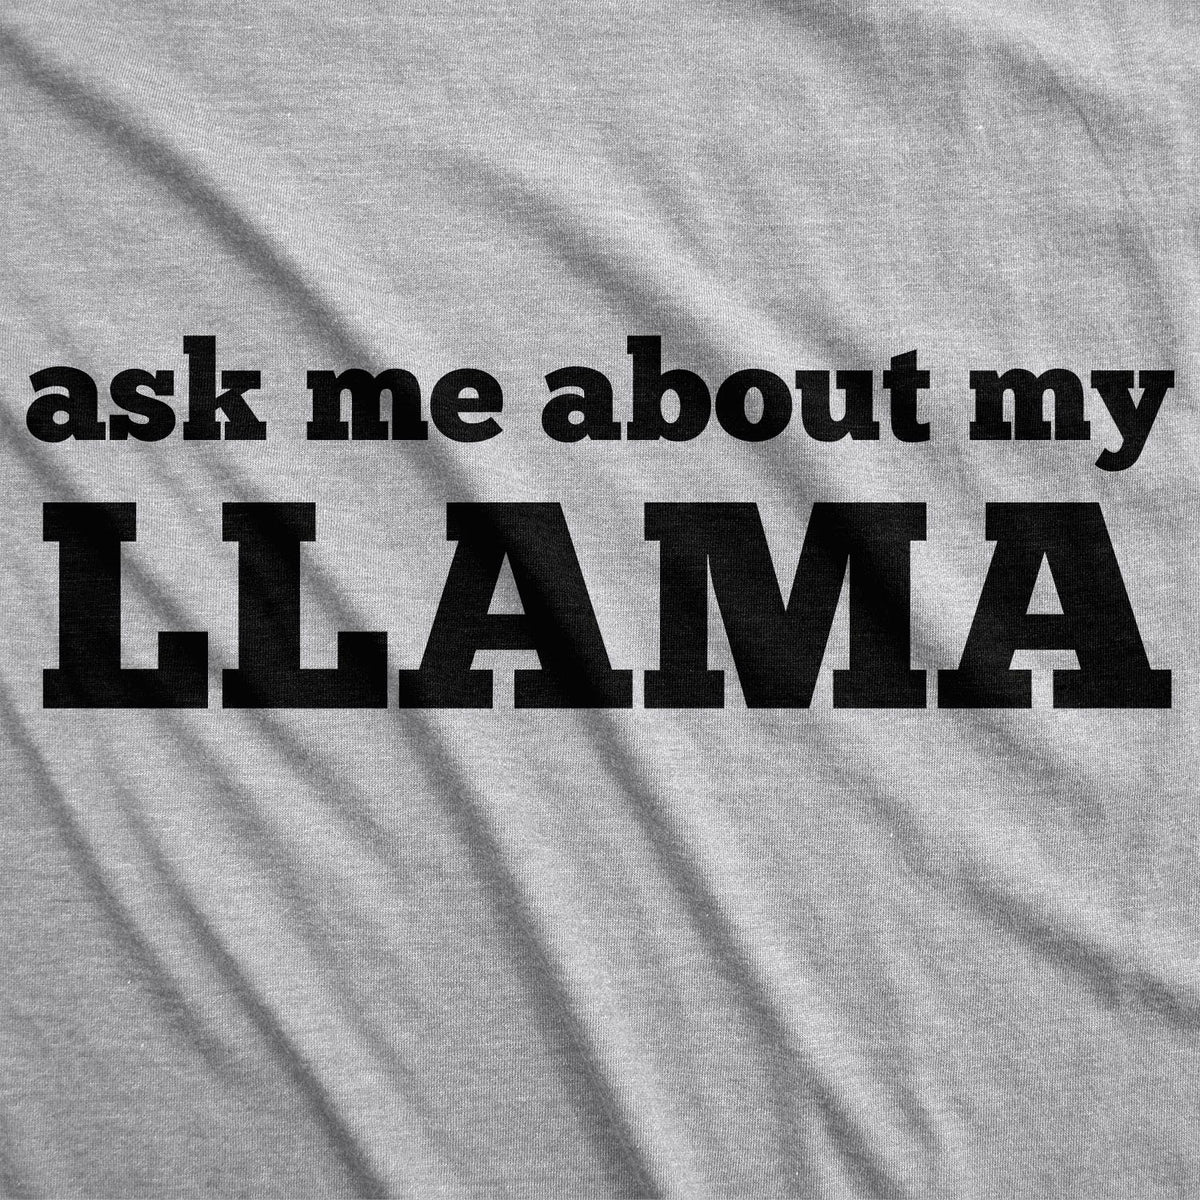 Ask Me About My Llama Flip Youth T Shirt